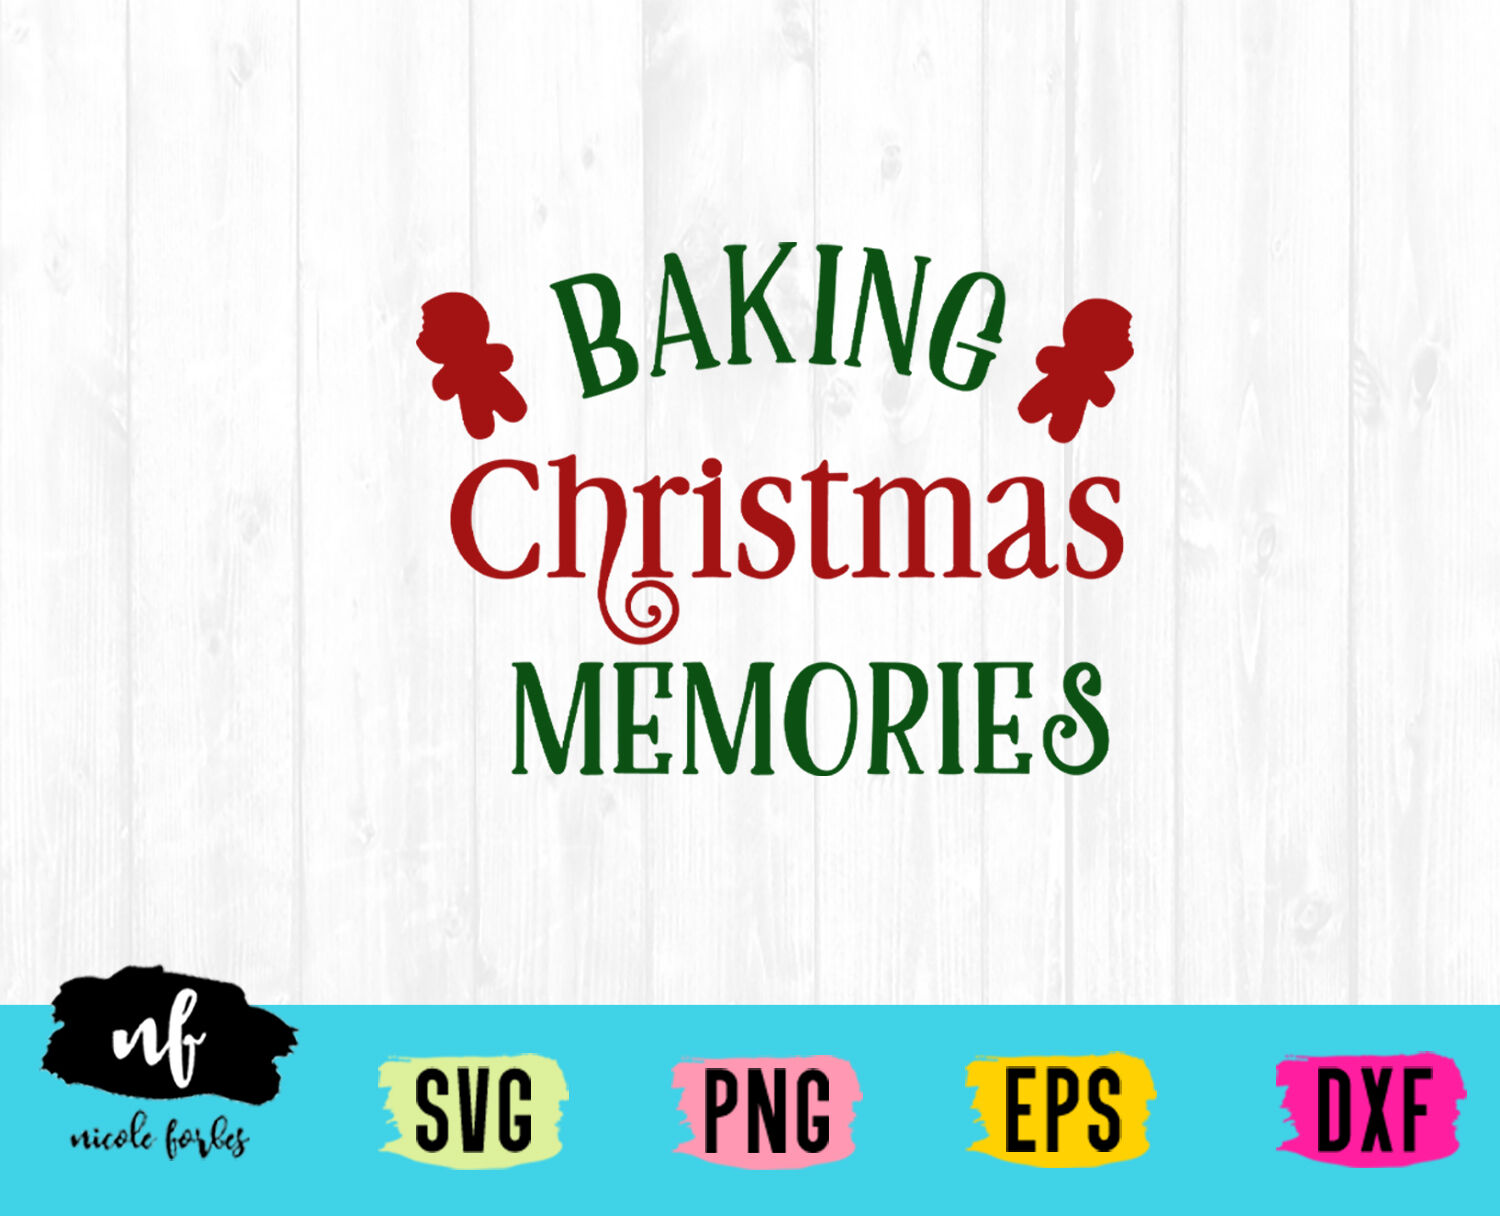 Christmas Baking SVG Cut File By Nicole Forbes Designs | TheHungryJPEG.com